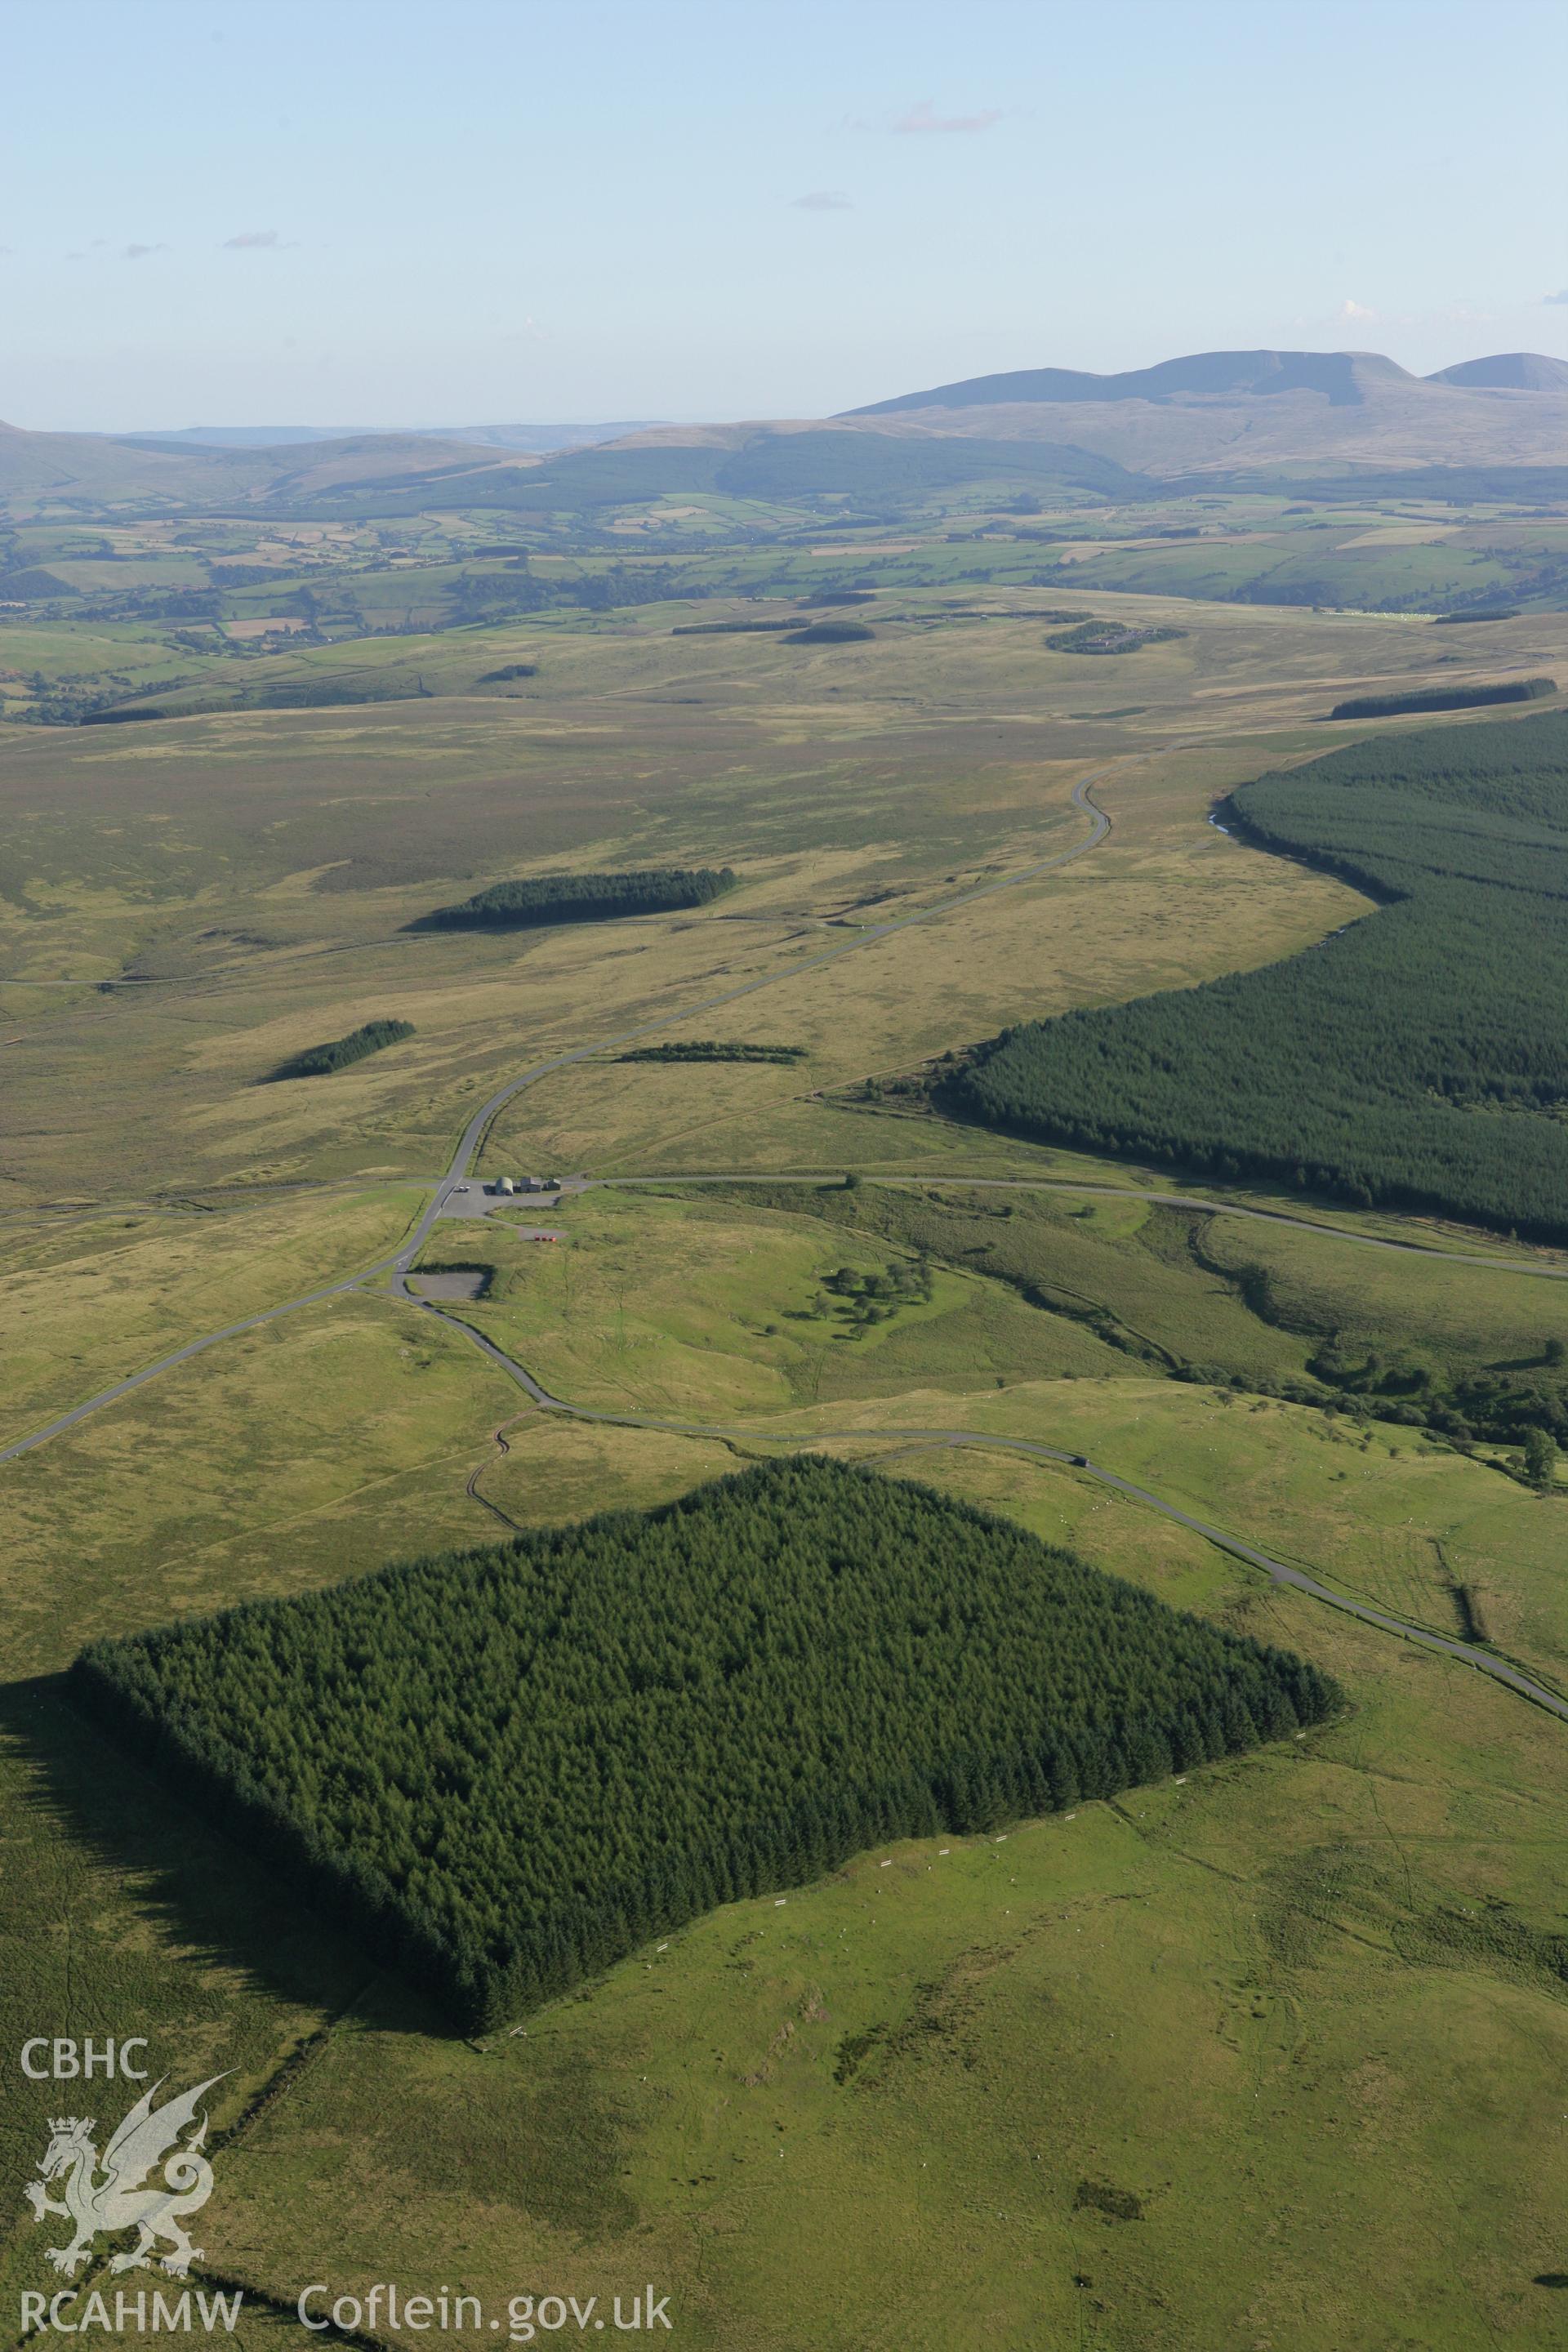 RCAHMW colour oblique aerial photograph of Sennybridge Military Training Area, Mynydd Epynt, showing the Dixie's Corner landscape. Taken on 08 August 2007 by Toby Driver